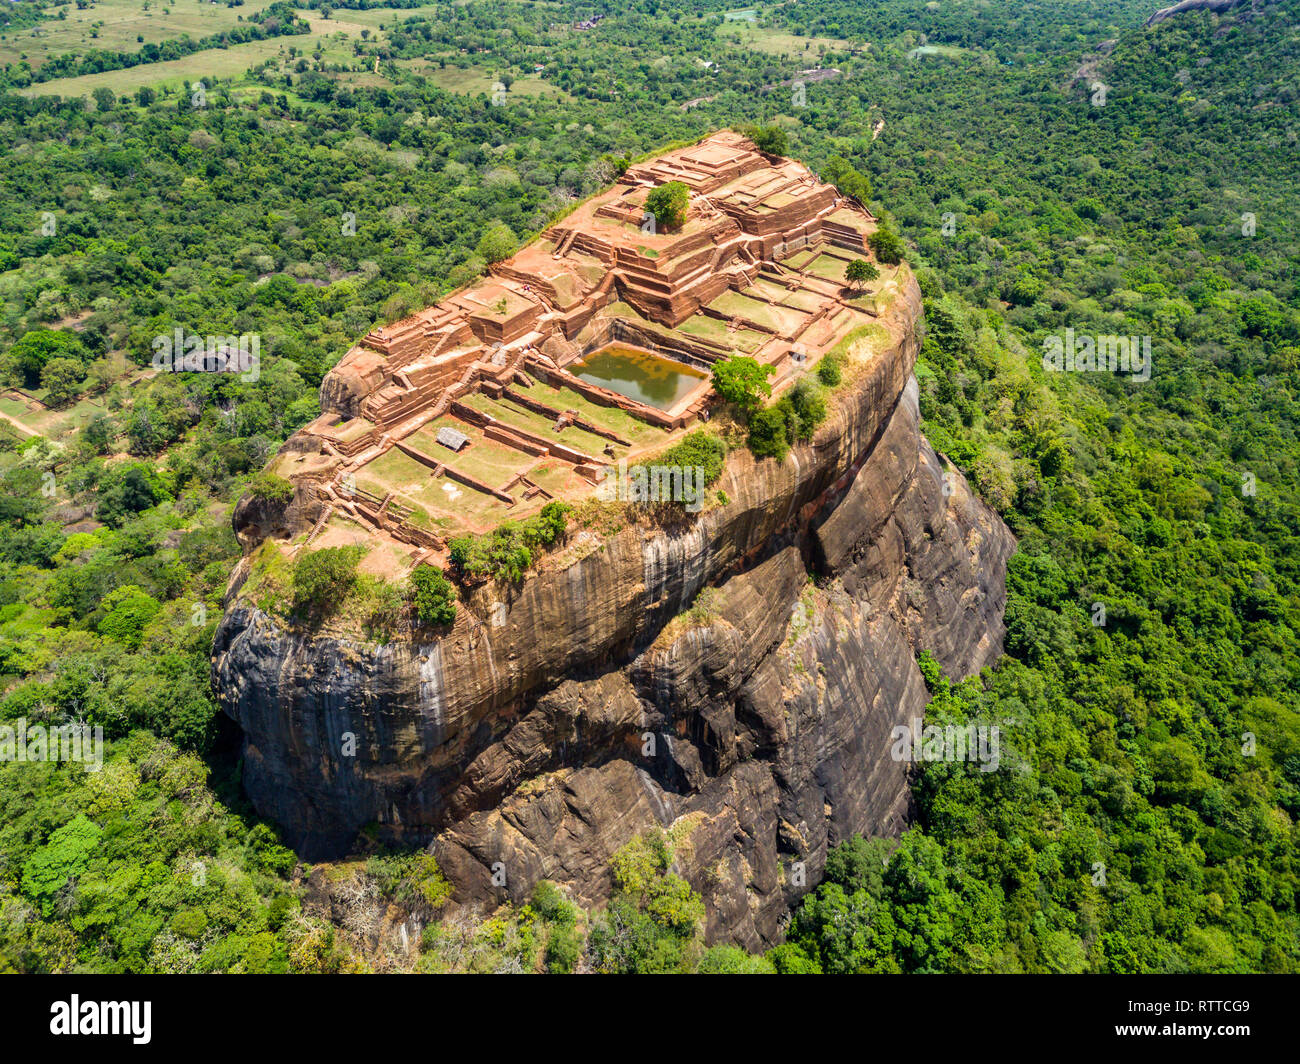 Sigiriya or the Lion Rock, an ancient fortress and a palace with gardens, pools, and terraces atop of granite rock in Dambulla, Sri Lanka. Aerial view. Stock Photo